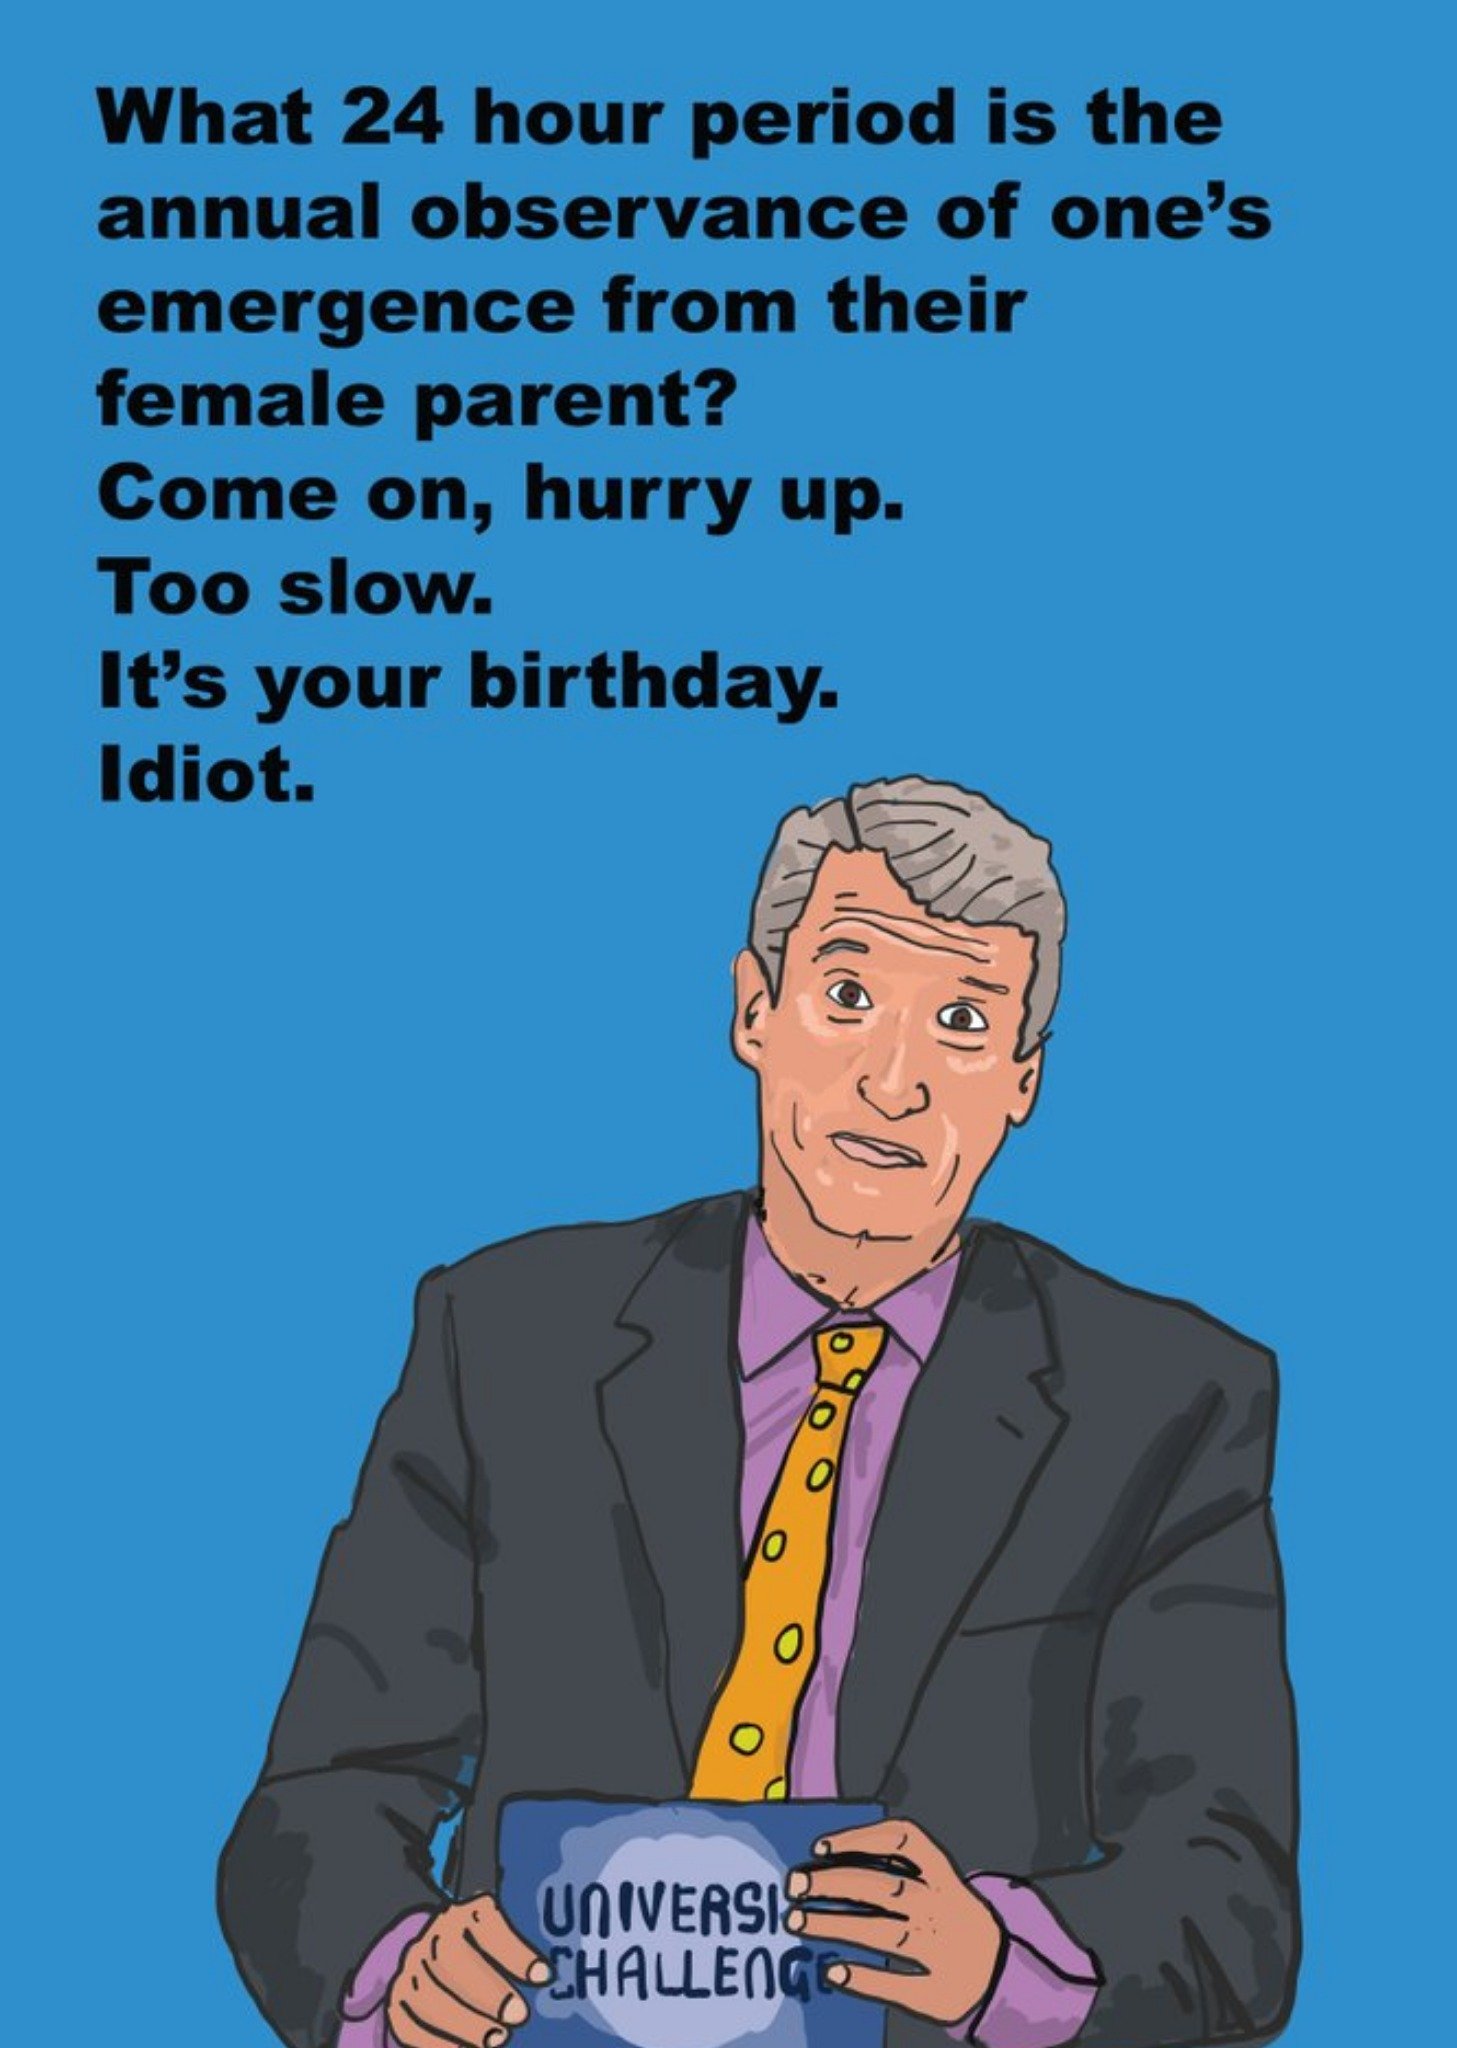 Moonpig Objectables It's Your Birthday Idiot Celebrity Funny Card, Large